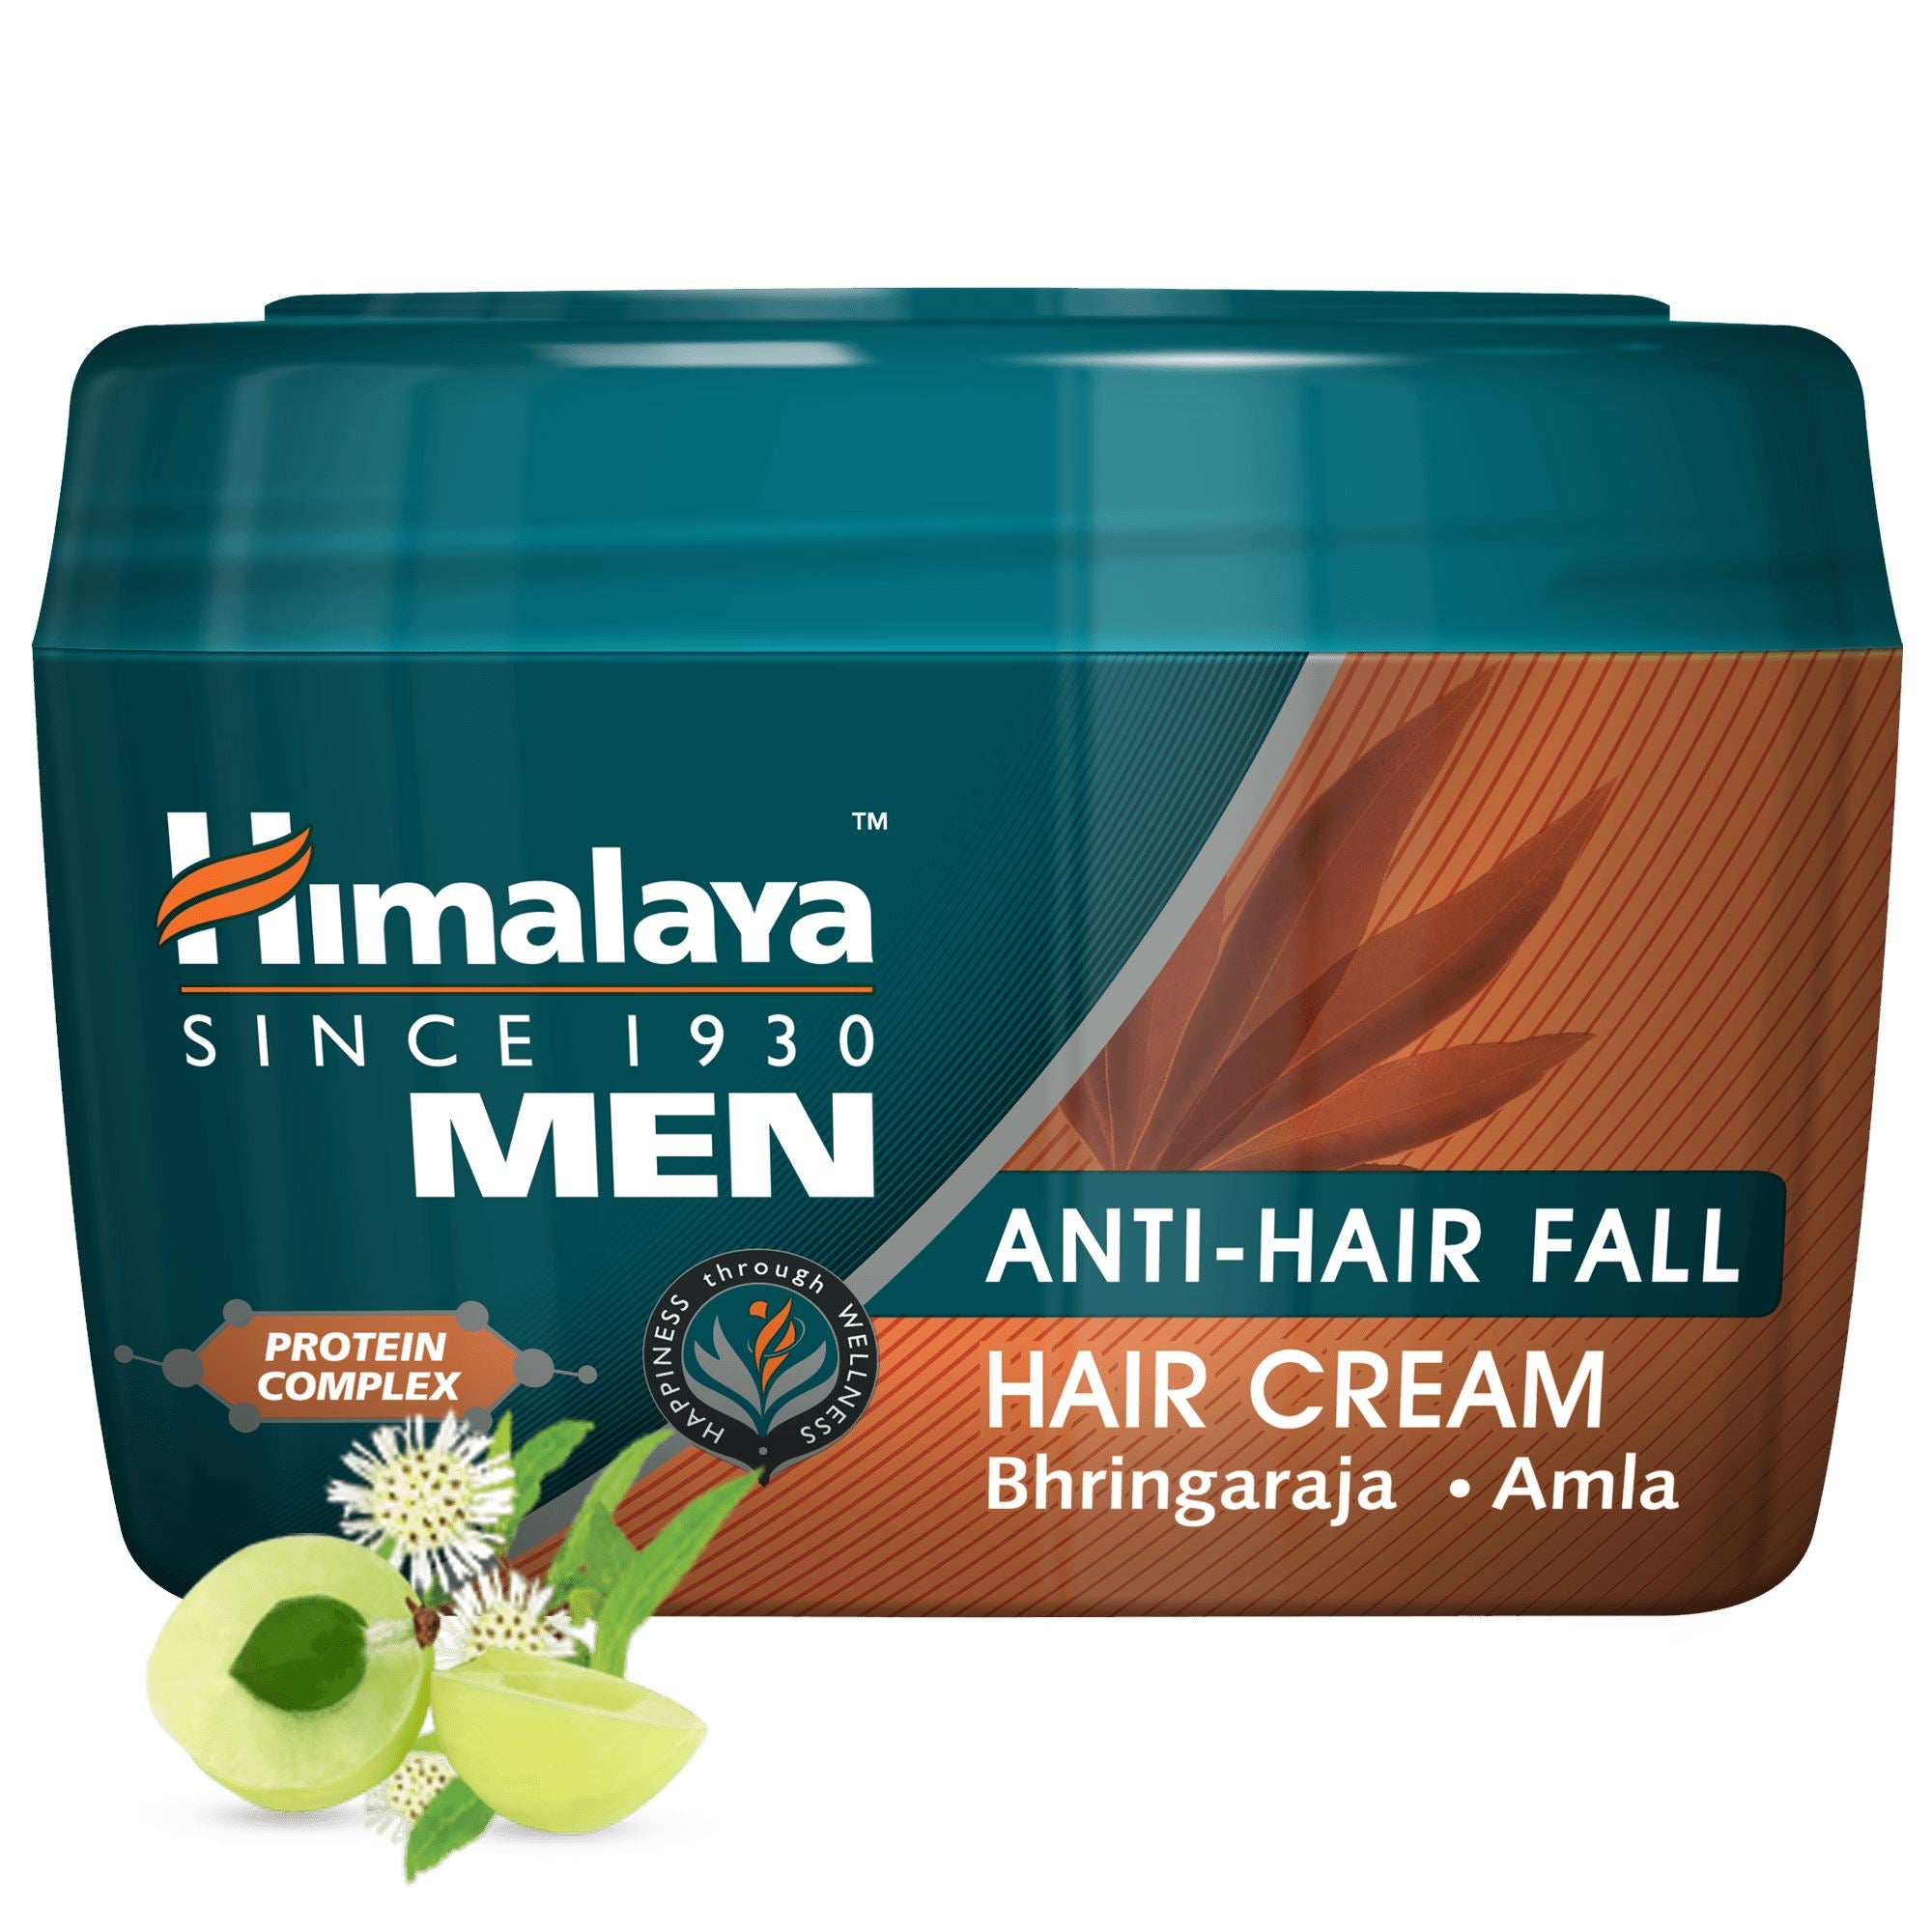 Himalaya MEN Anti-Hair Fall Hair Cream - Helps fight dandruff, gently nourishes and strengthens hair